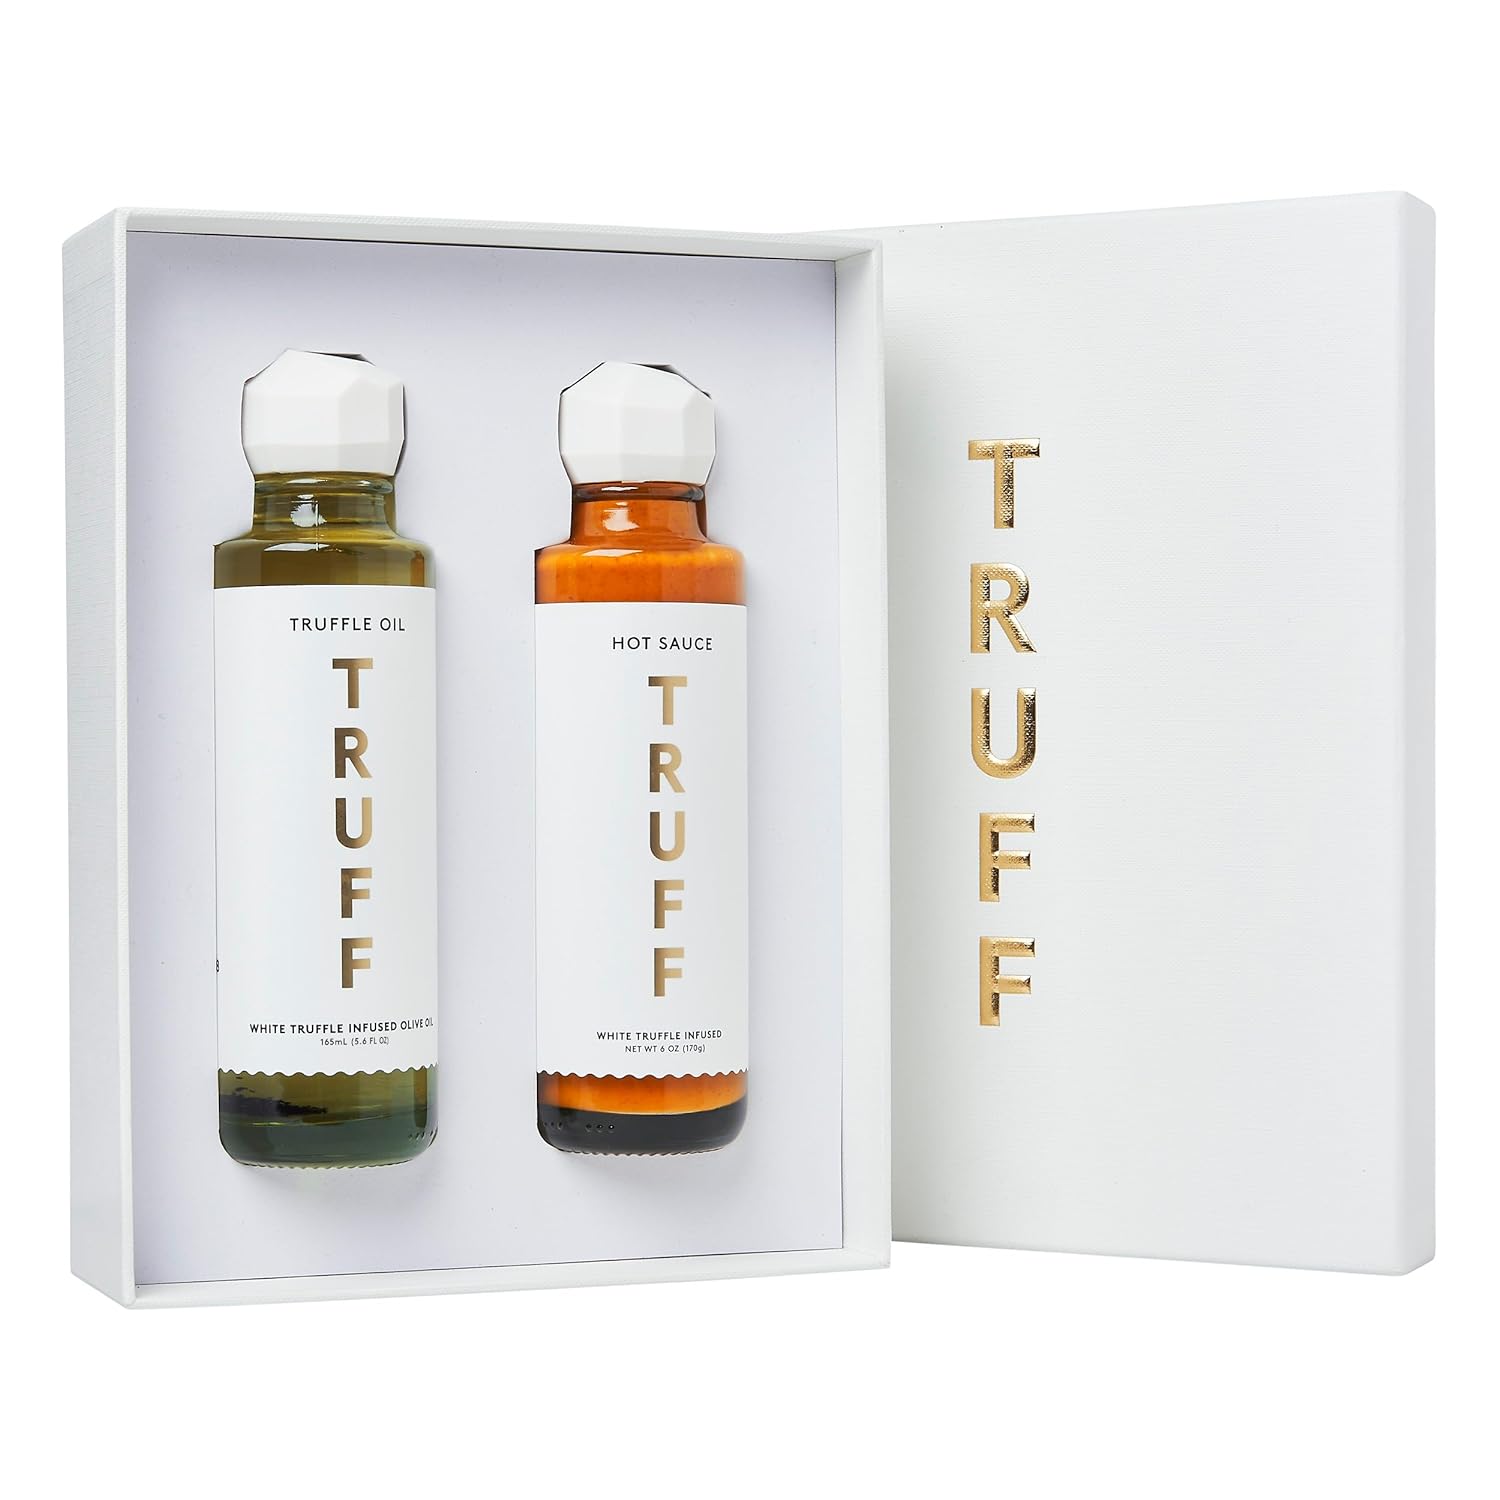 TRUFF Best Seller Pack - Gourmet Hot Sauce Set of Original, White Truffle  Edition, and Black Truffle Oil, 3ct 6oz bottles - Delivered In As Fast As  15 Minutes